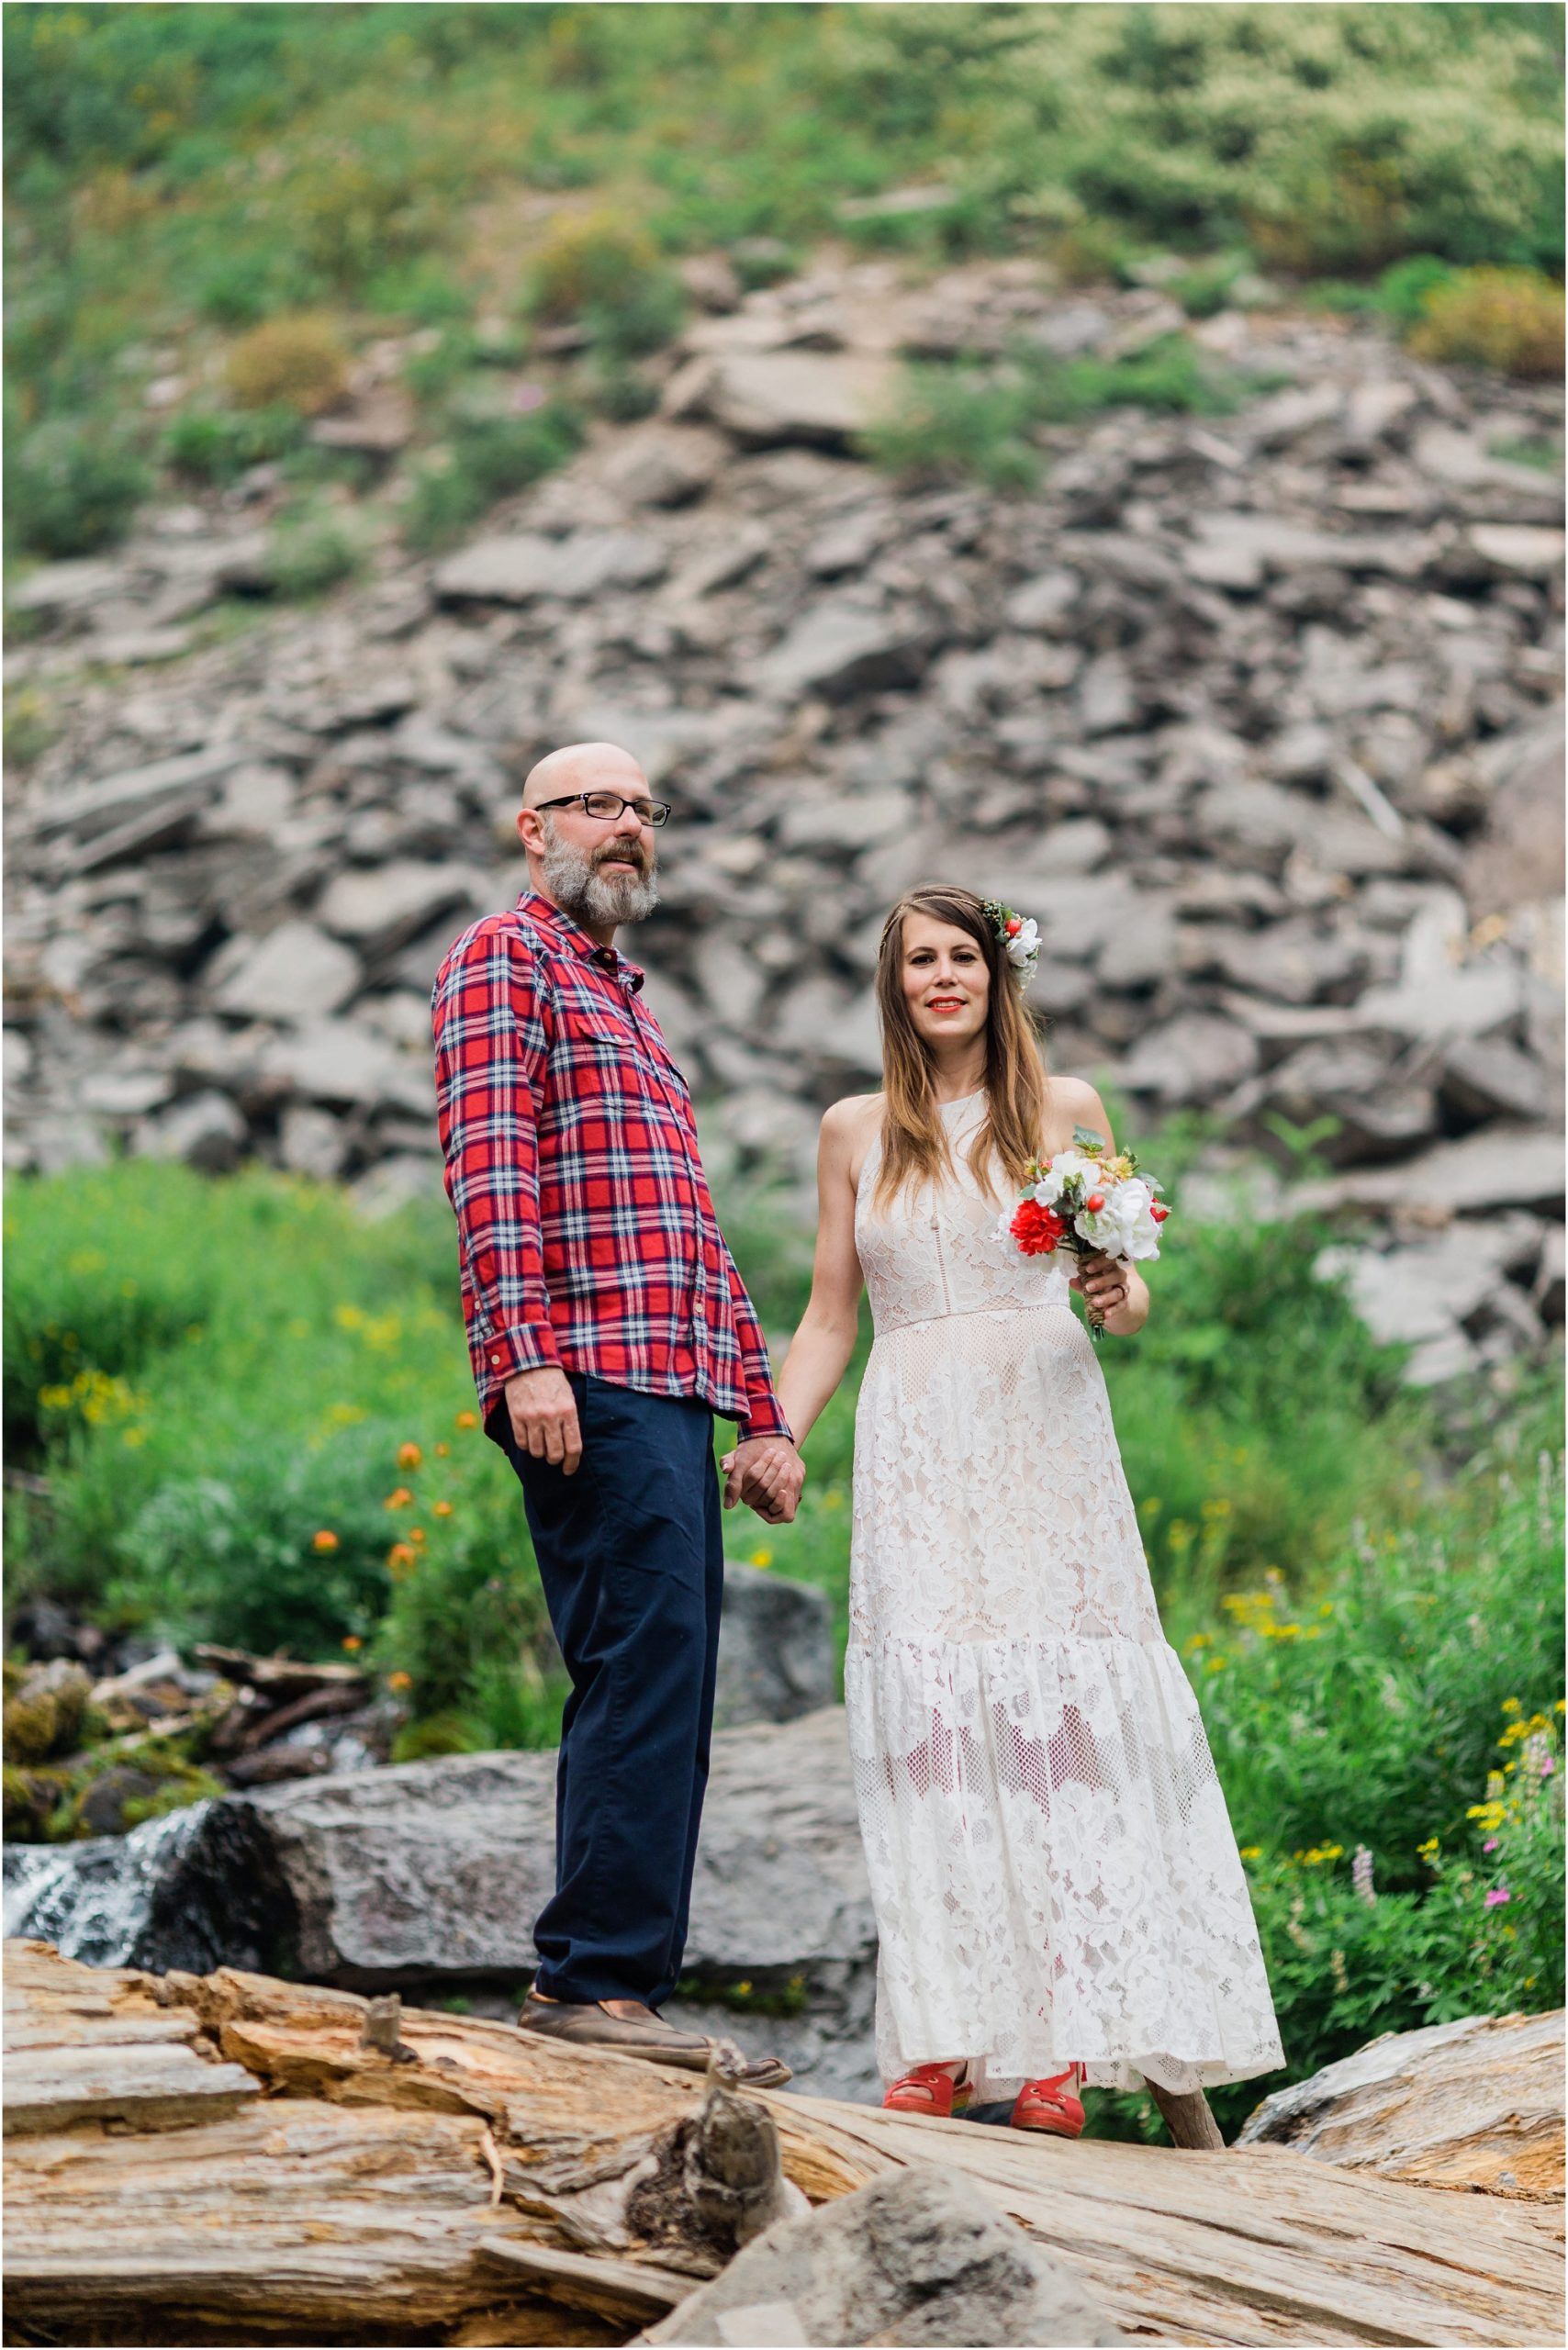 An indie elopement at Crater Lake National Park, the groom wearing red plaid and navy slacks, the bride in a gorgeous boho gown with flowers in her hair. | Erica Swantek Photography